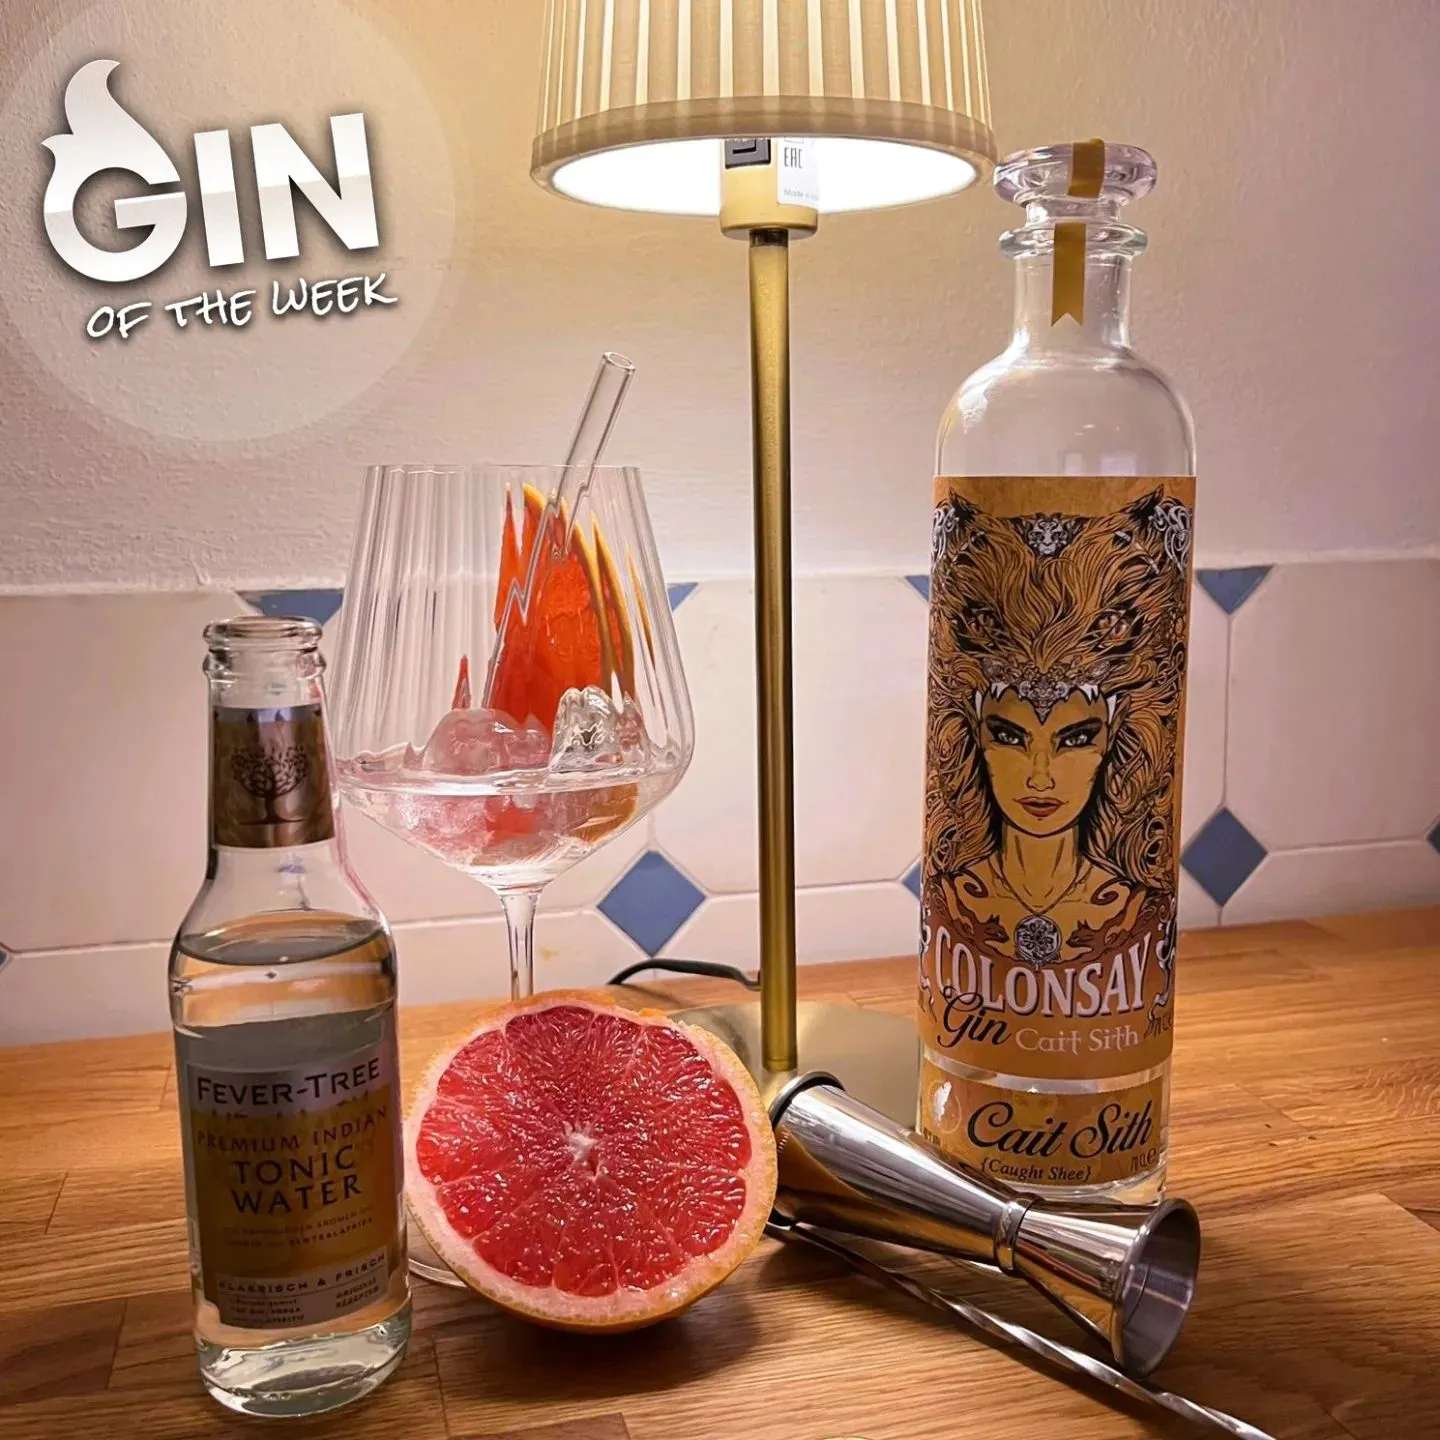 Colonsay Gin - Cait Sith